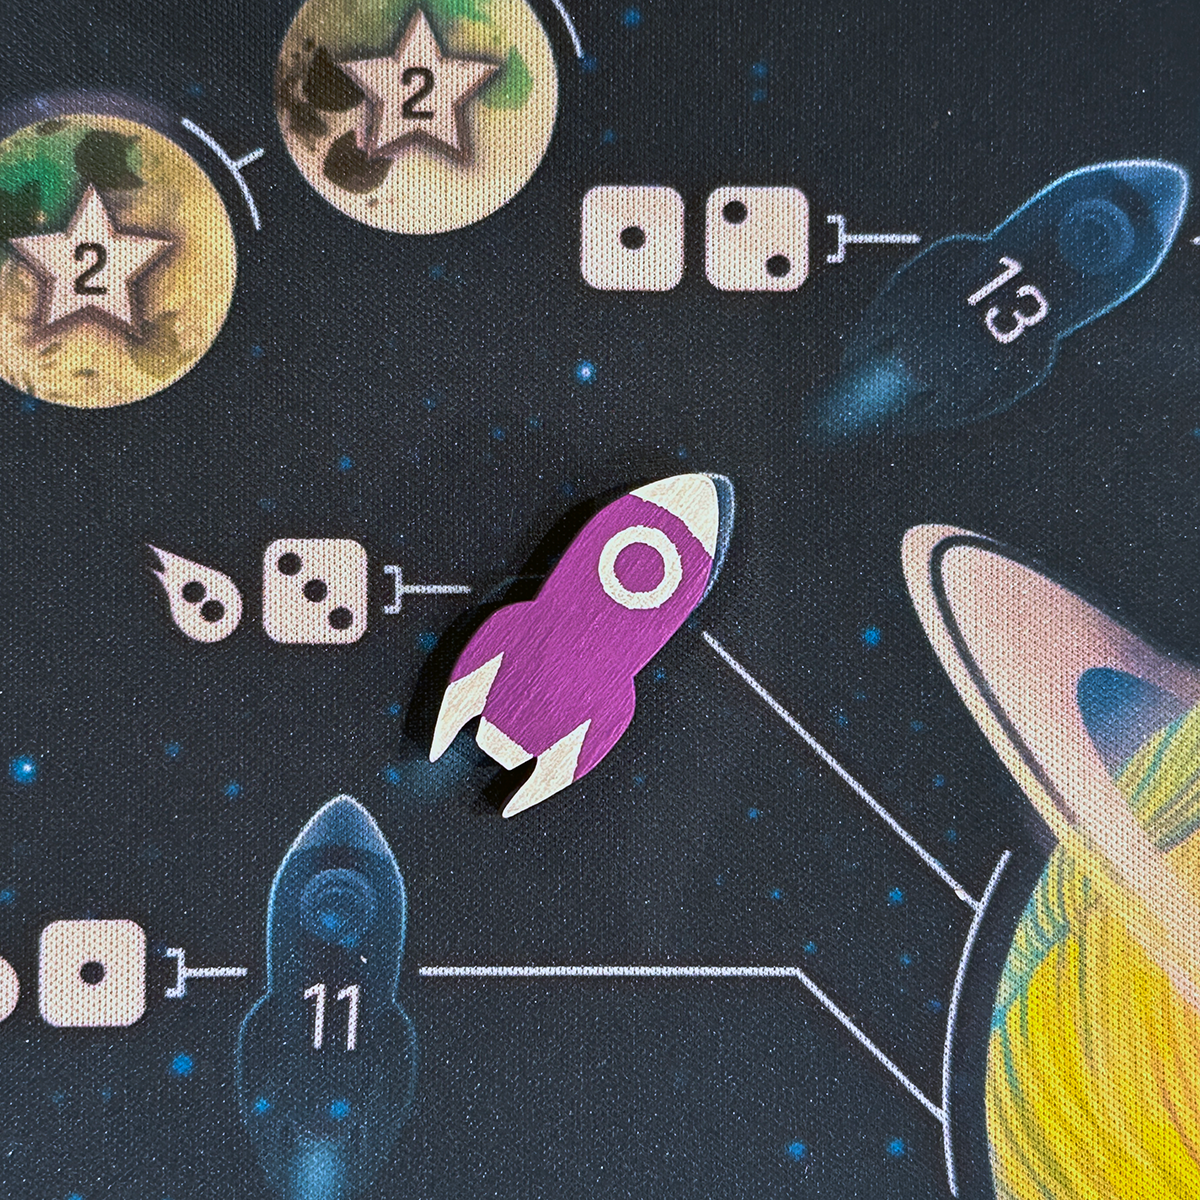 MLEM Space Agency Board Game Review Rocket Marker